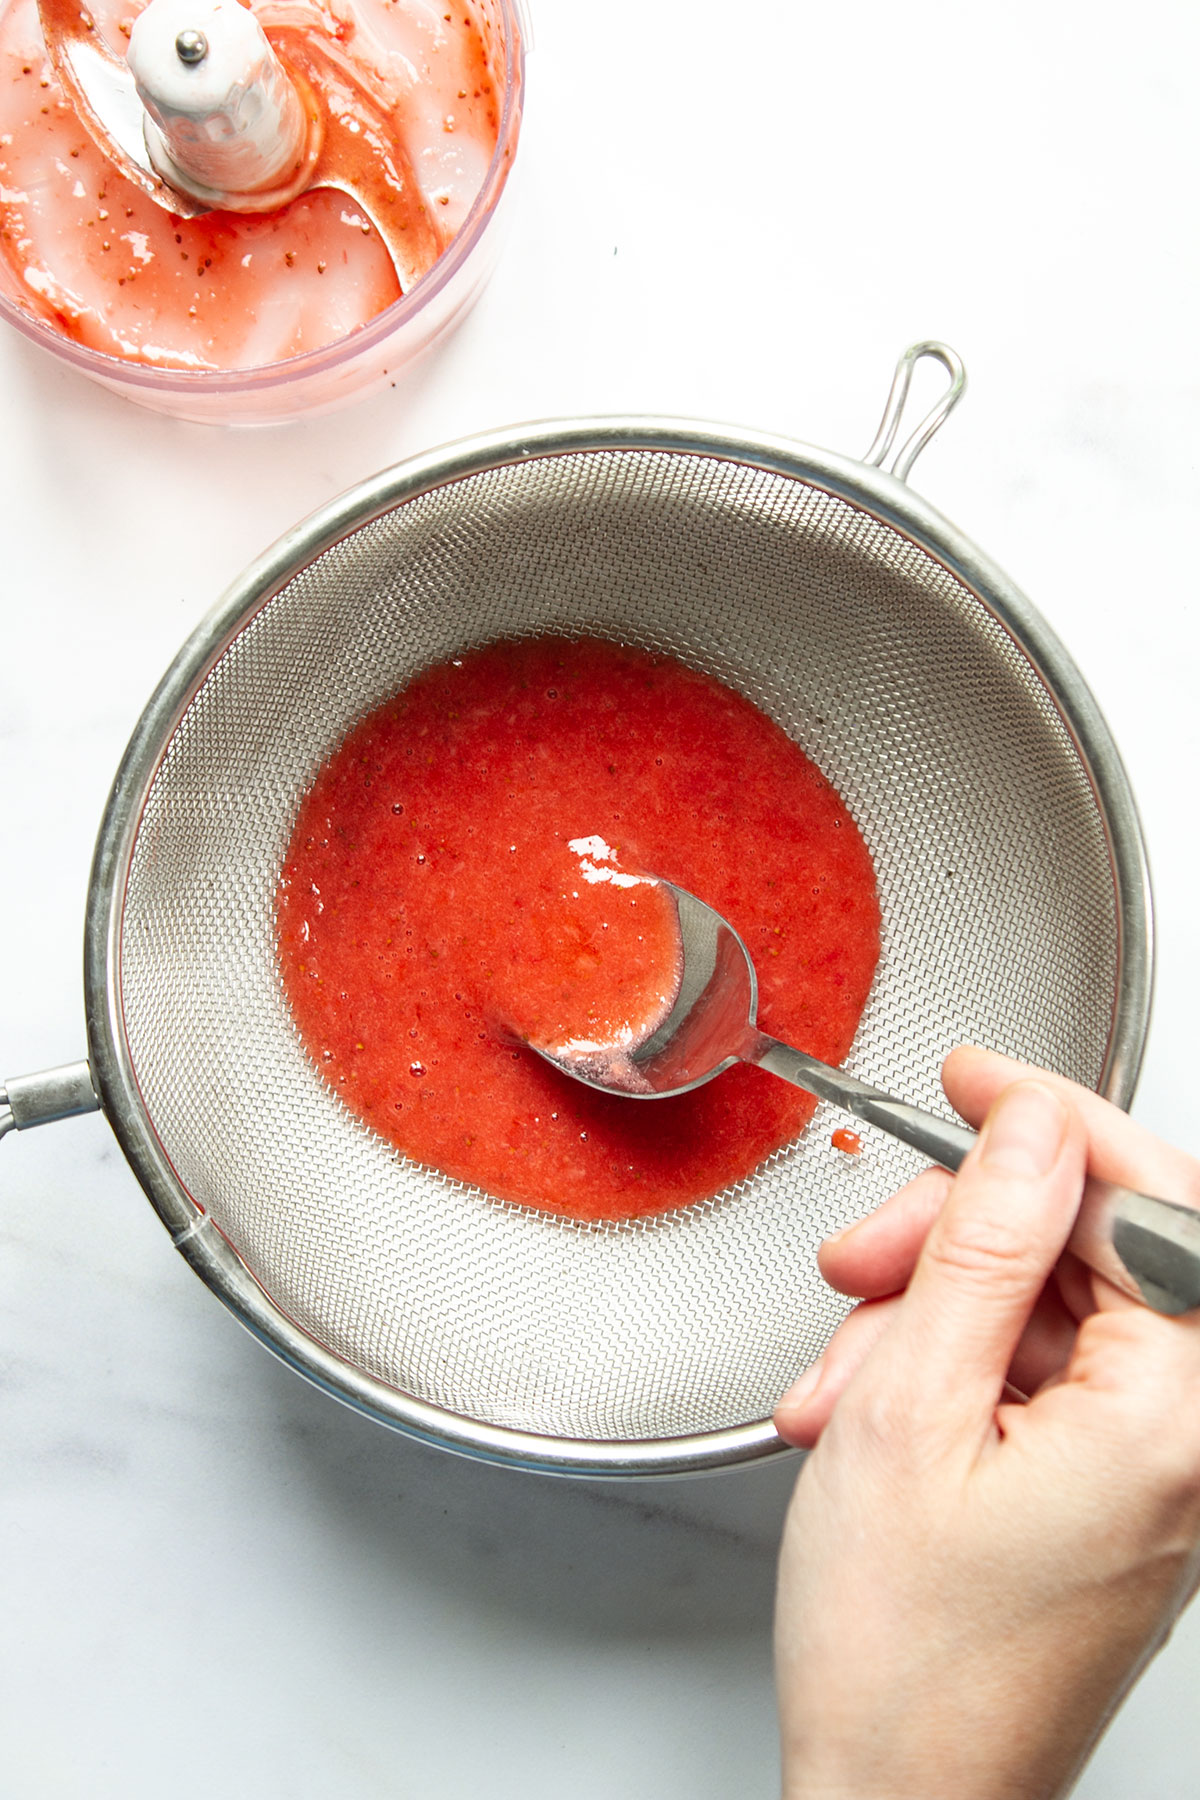 The blended mixture of strawberries, icing sugar and lemon juice being strained through a sieve.